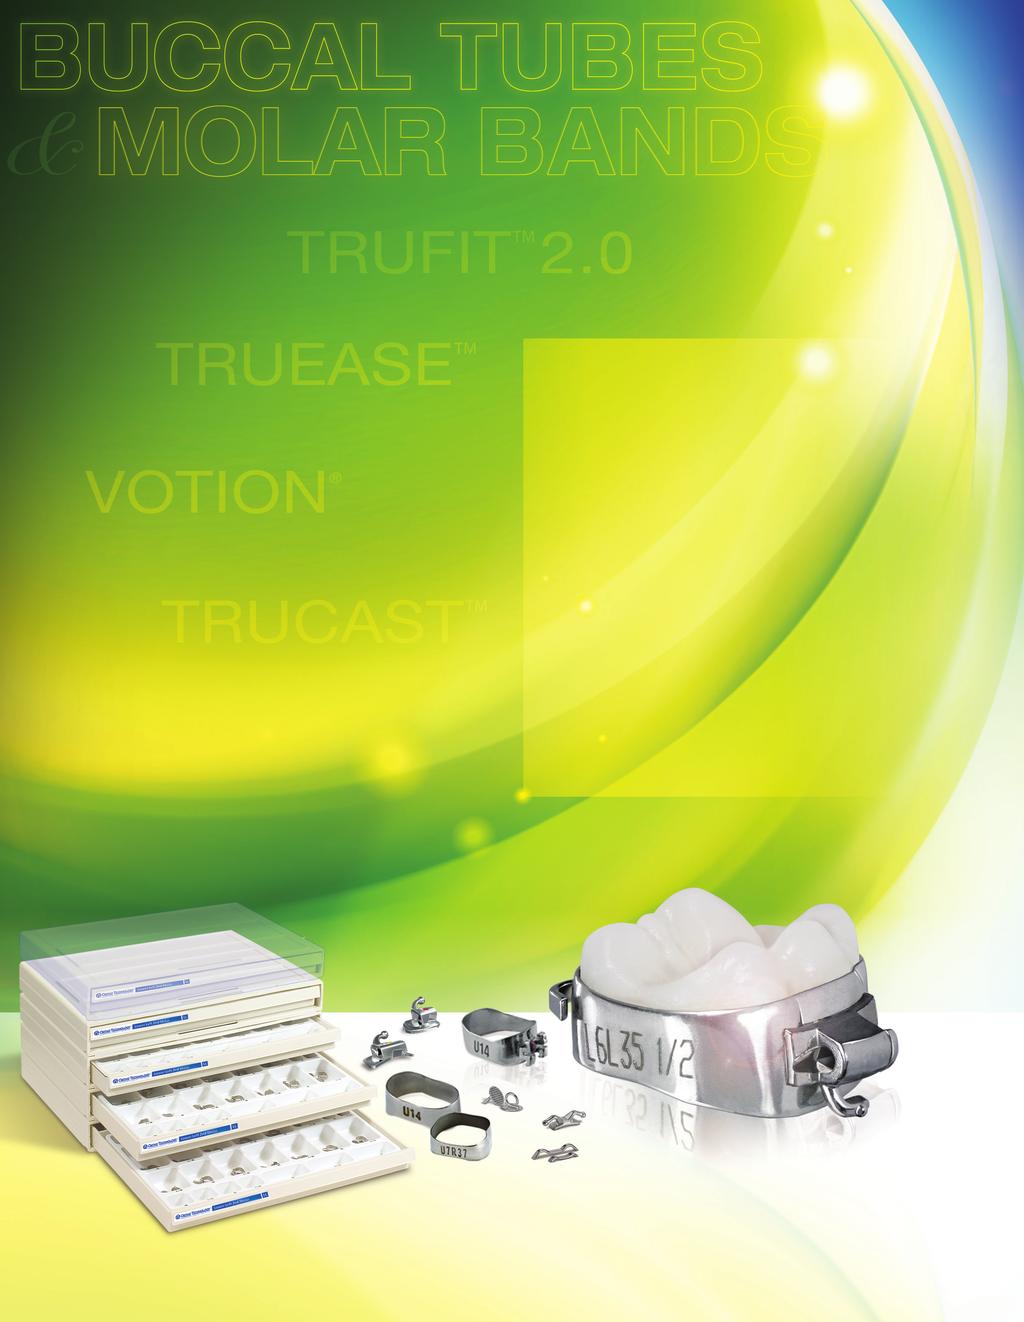 BUCCAL TUBE & OLA BAND s & Bands TruFit.0 P. 55-67 Buccal s P. 55-57 Buccal s P. 58-59 olar Bands P. 60 Prewelded Band & Assemblies P. 6-64 Prewelded Band & Assembly tarter Kits P.